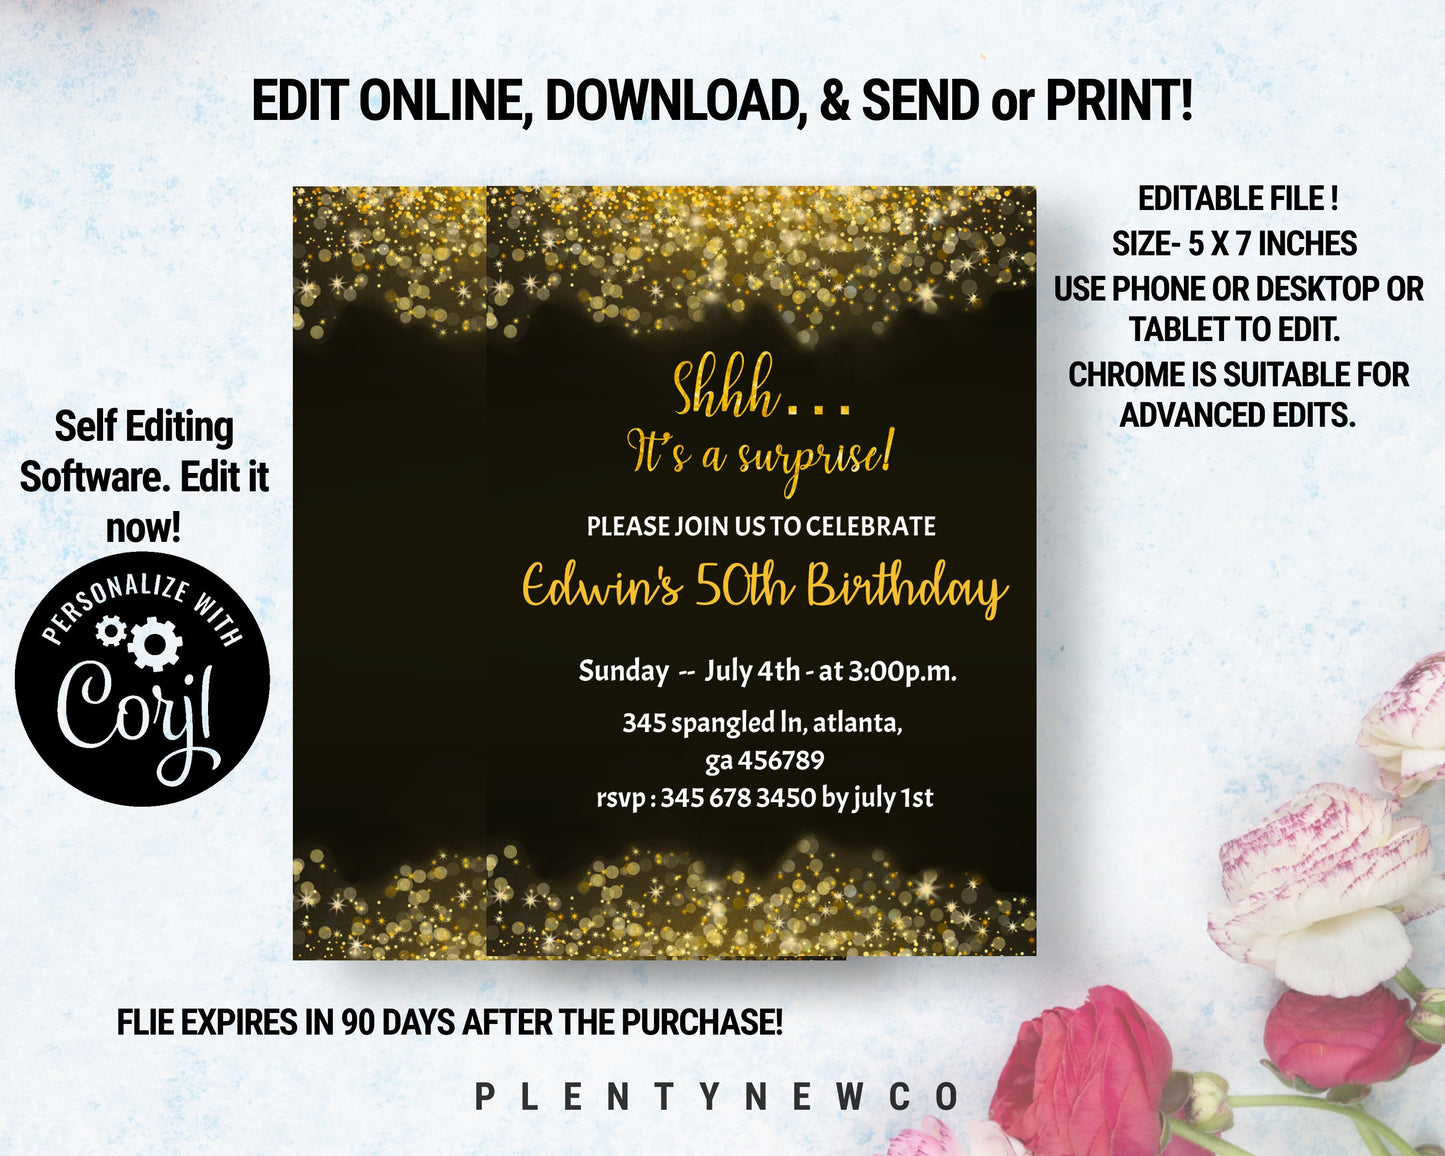 Surprise Birthday Invitation Any Age Gold Black Birthday Invitation Adult Birthday Instant Download Gold Glitter It's a Surprise! Bday, HB